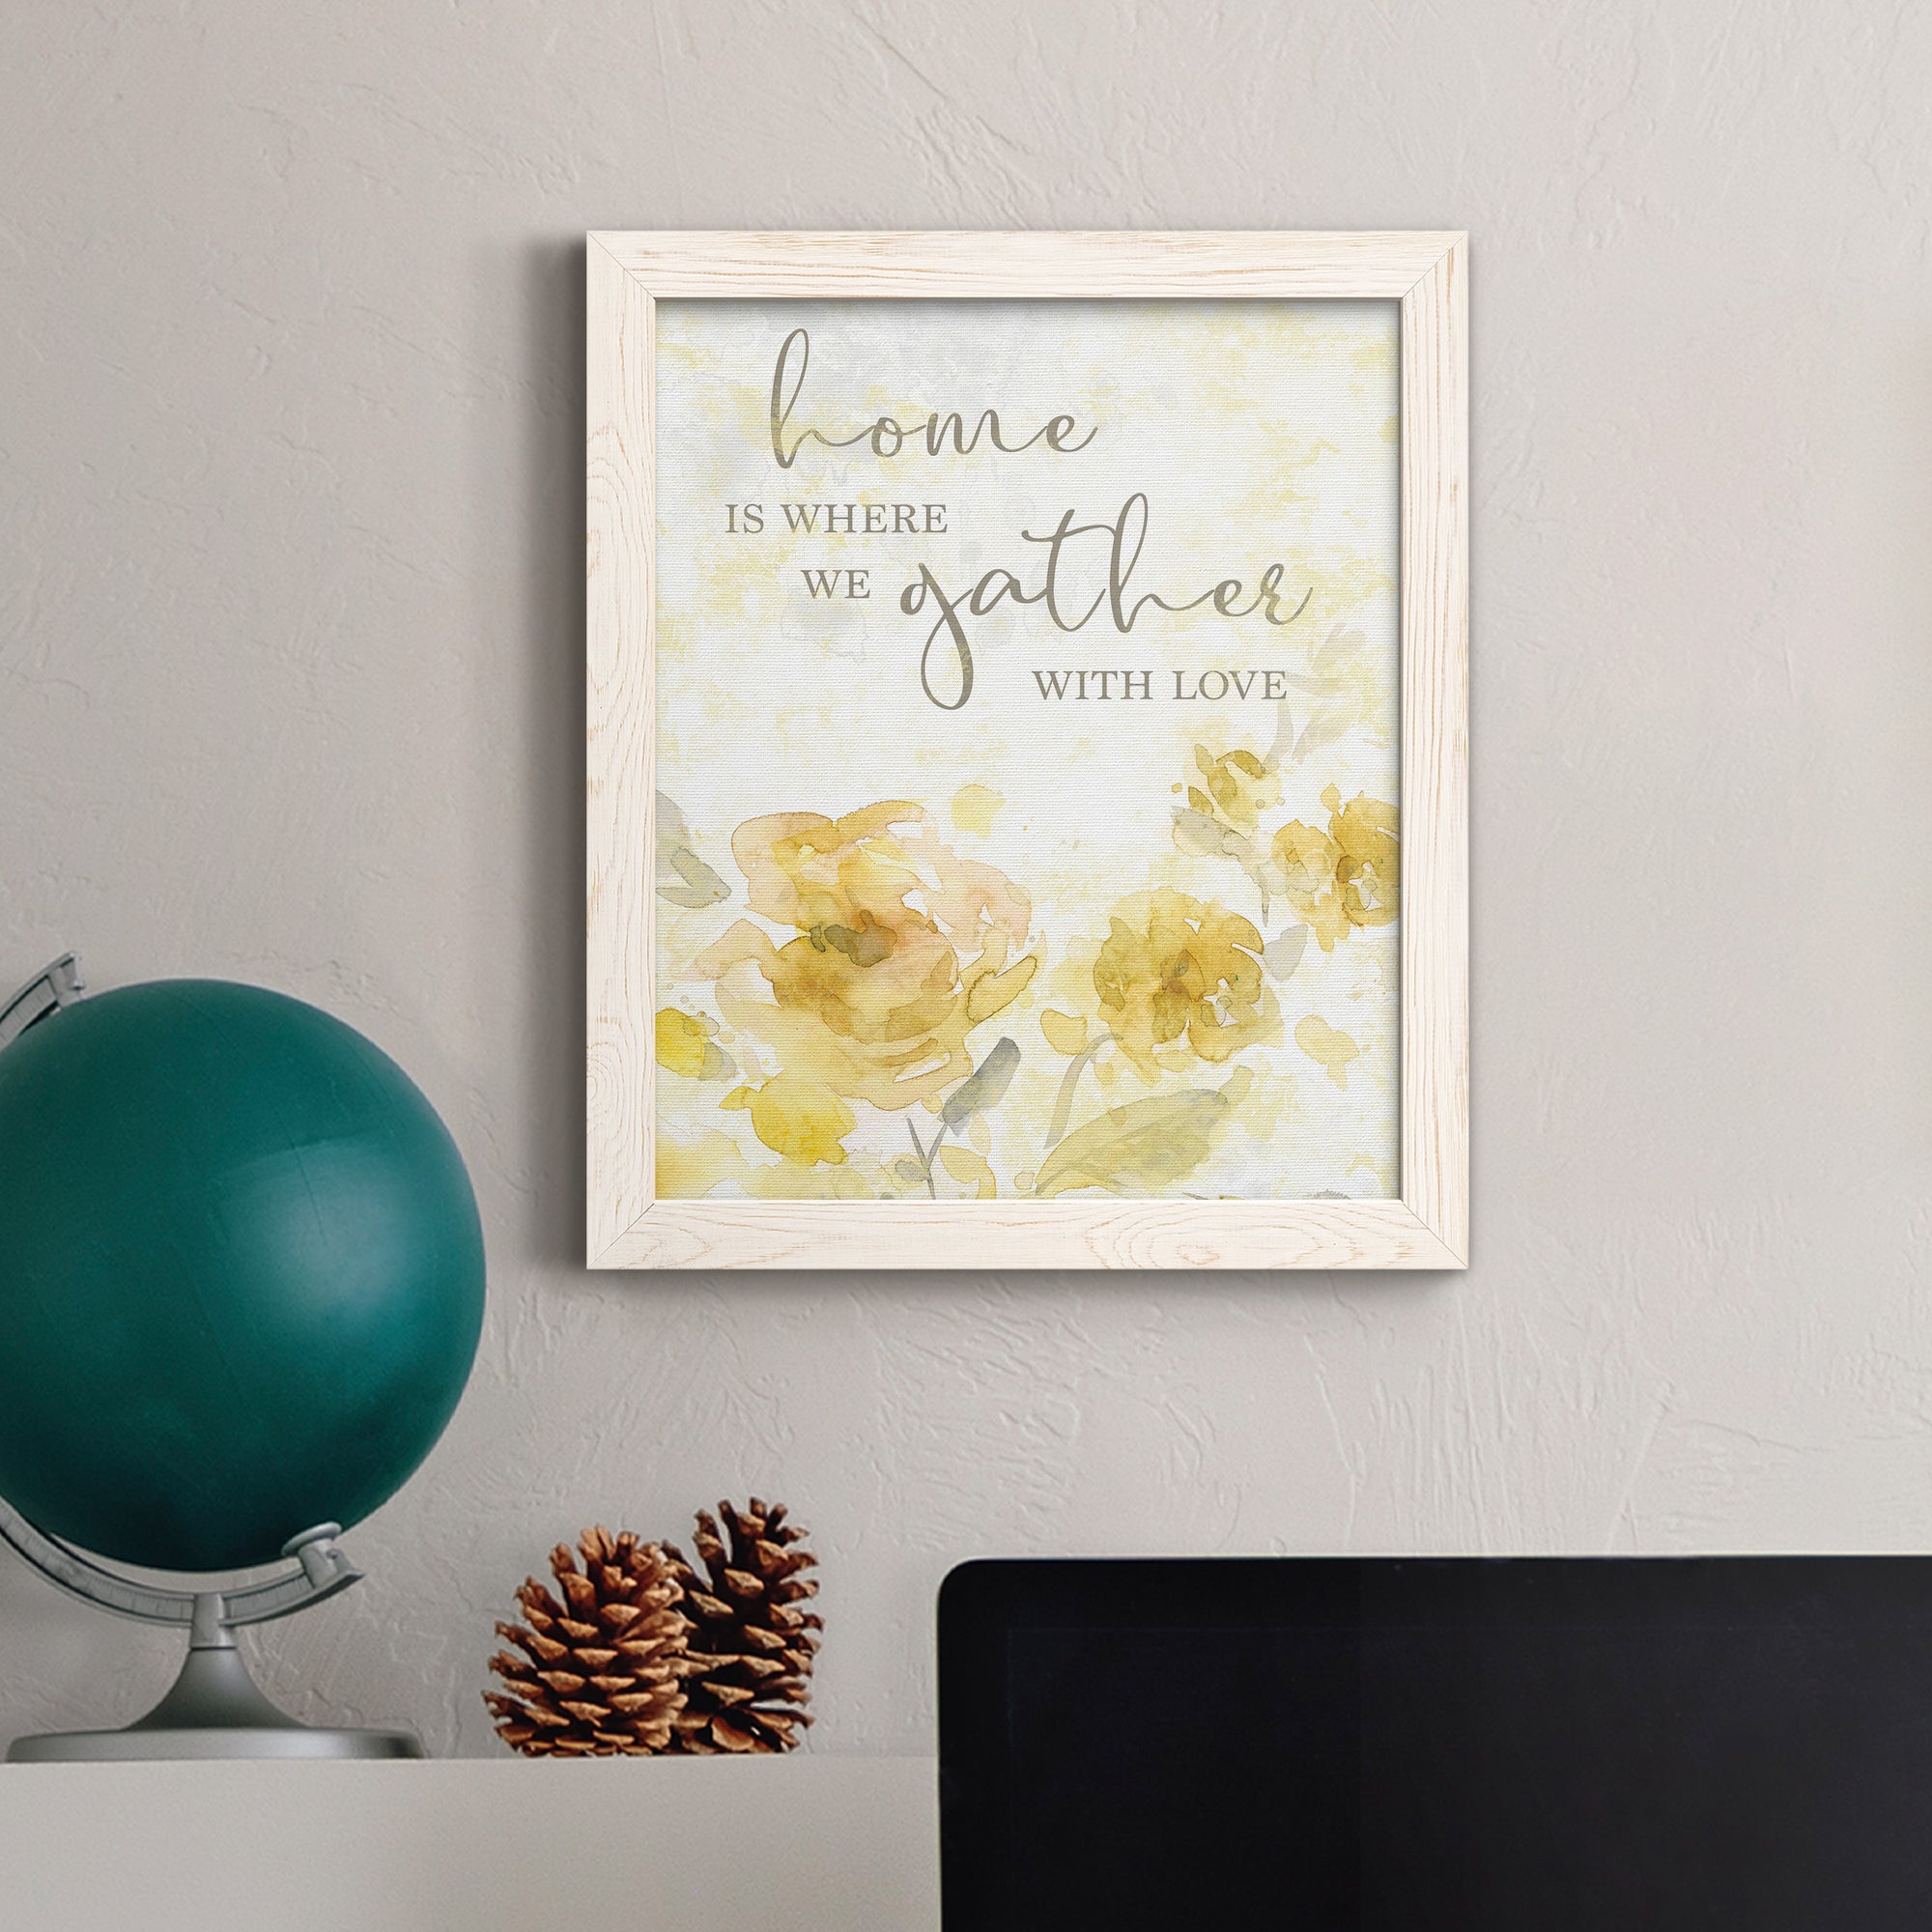 Gather with Love - Premium Canvas Framed in Barnwood - Ready to Hang